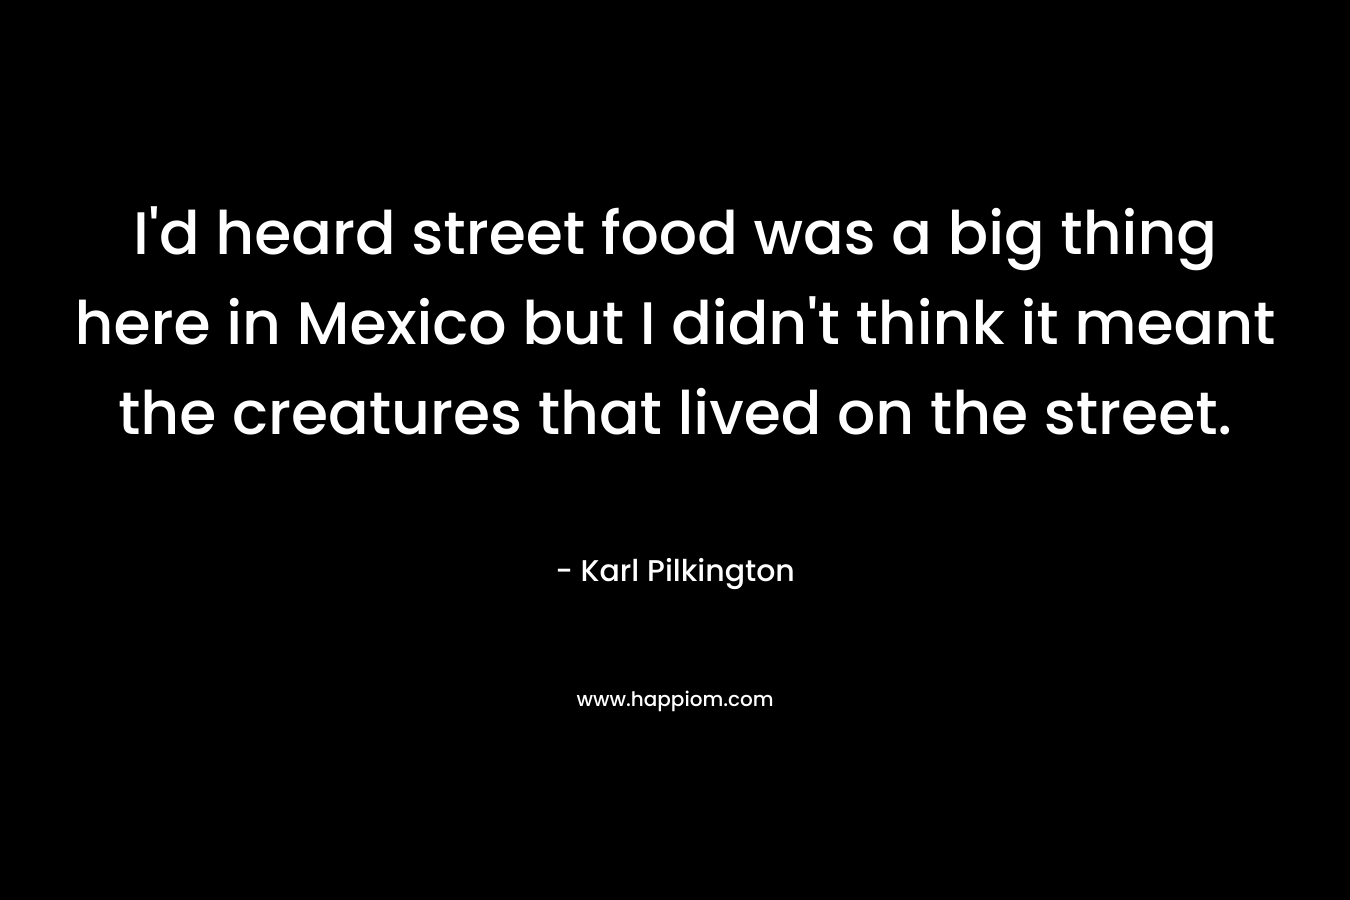 I’d heard street food was a big thing here in Mexico but I didn’t think it meant the creatures that lived on the street. – Karl Pilkington